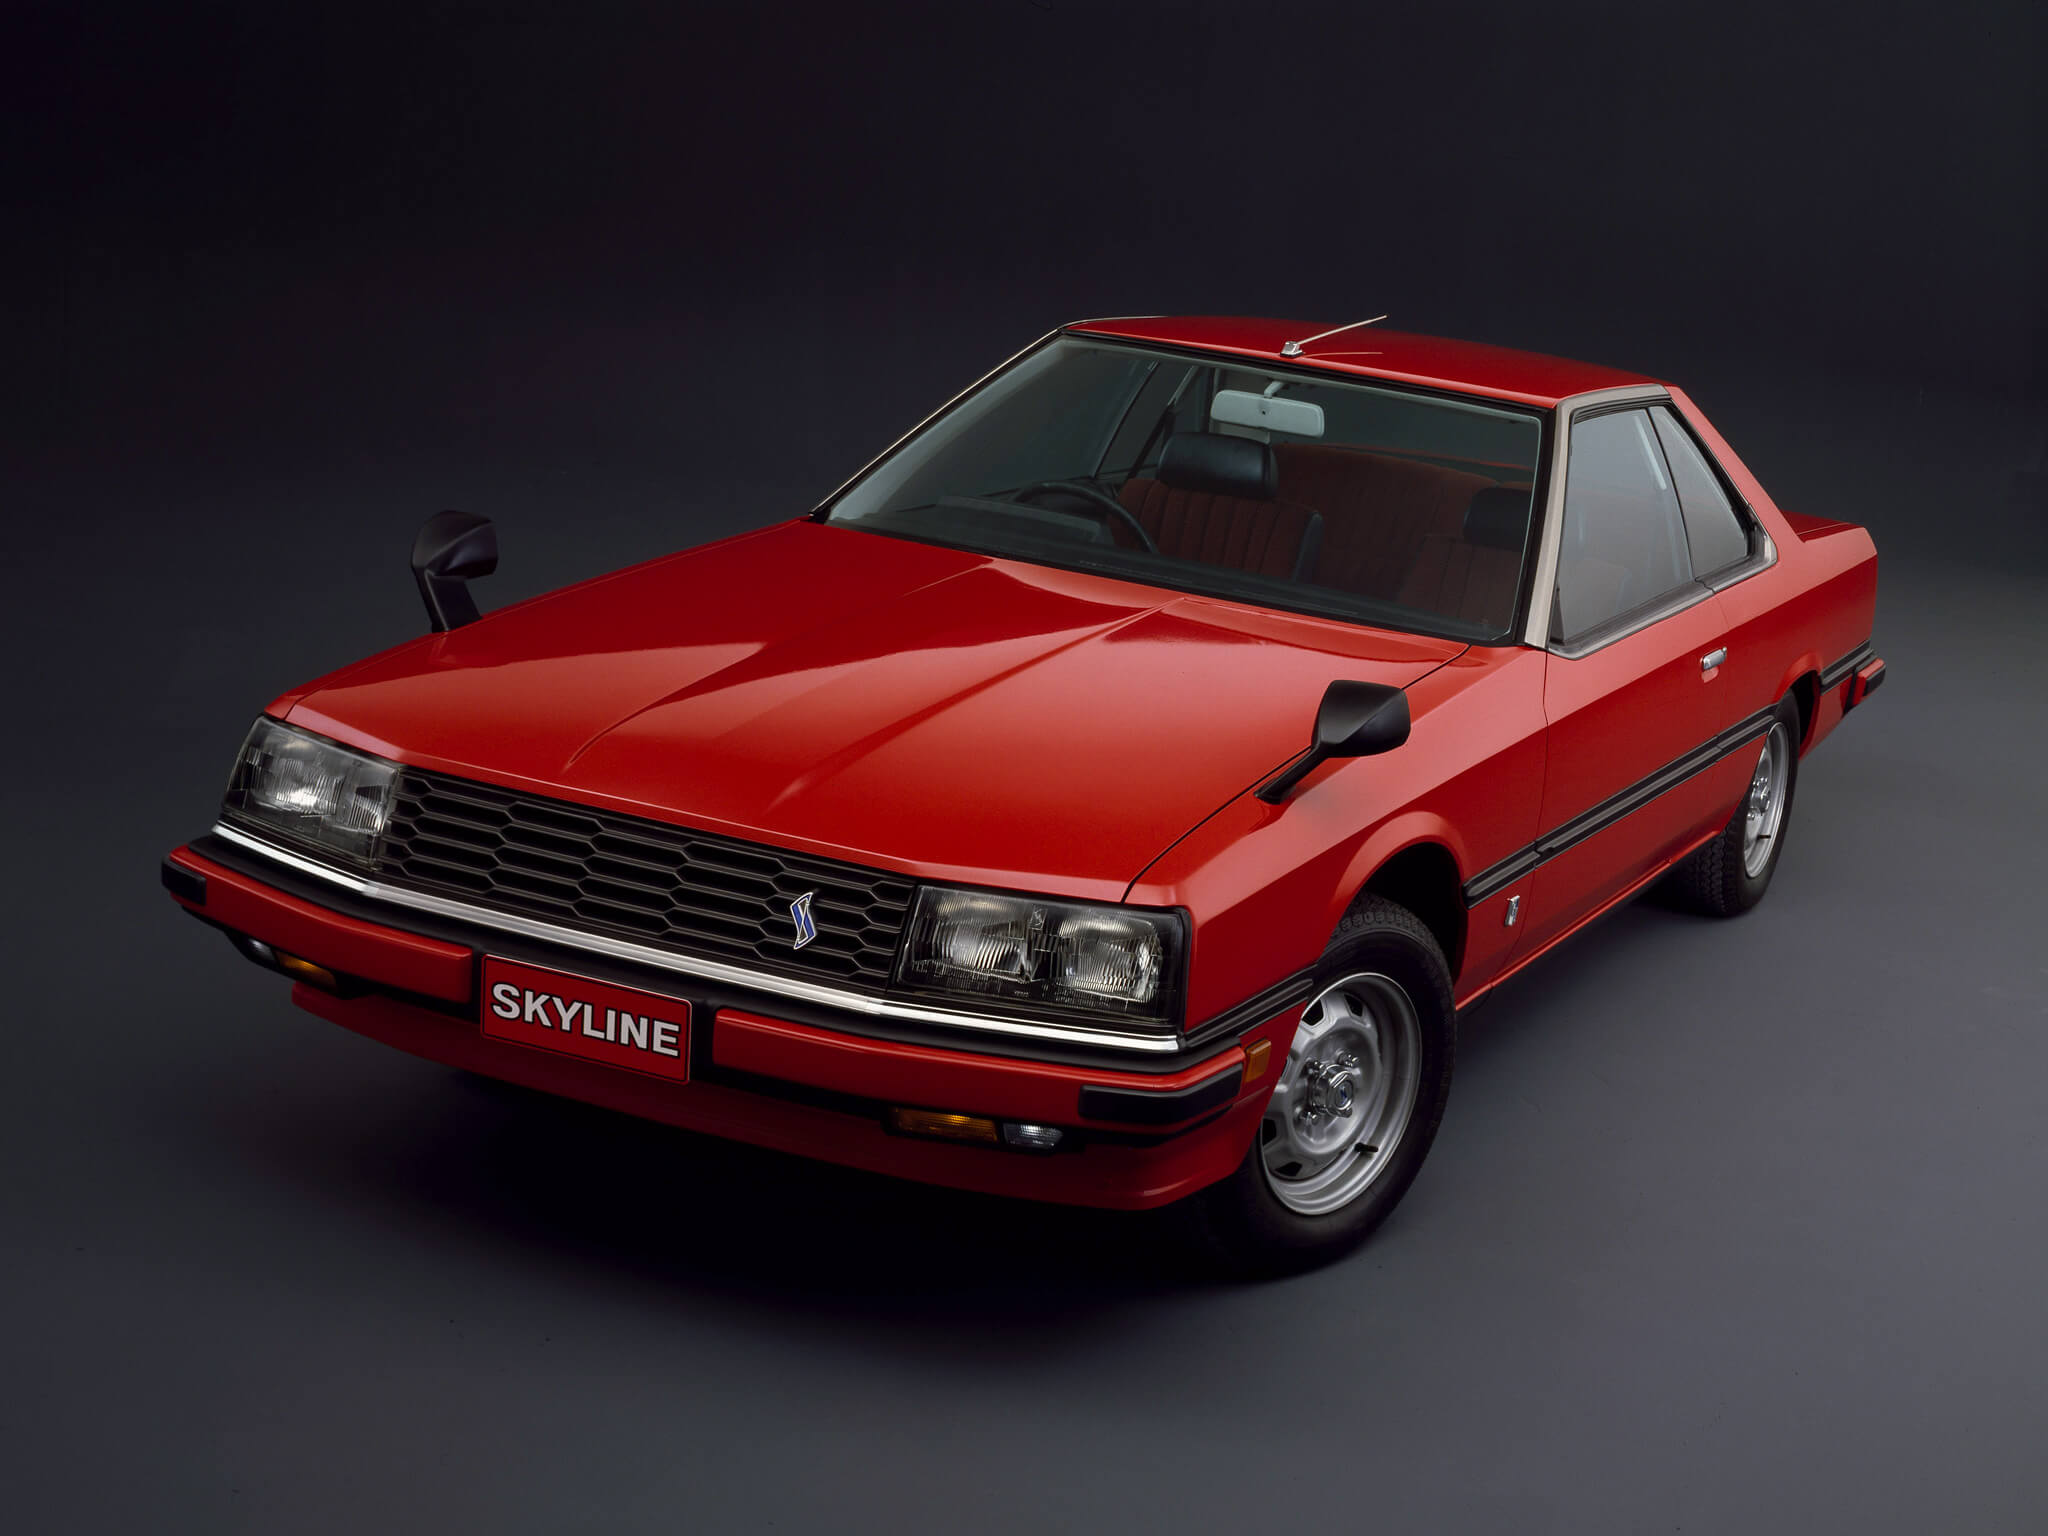 Nissan Skyline - specifications, photos, videos, all generations